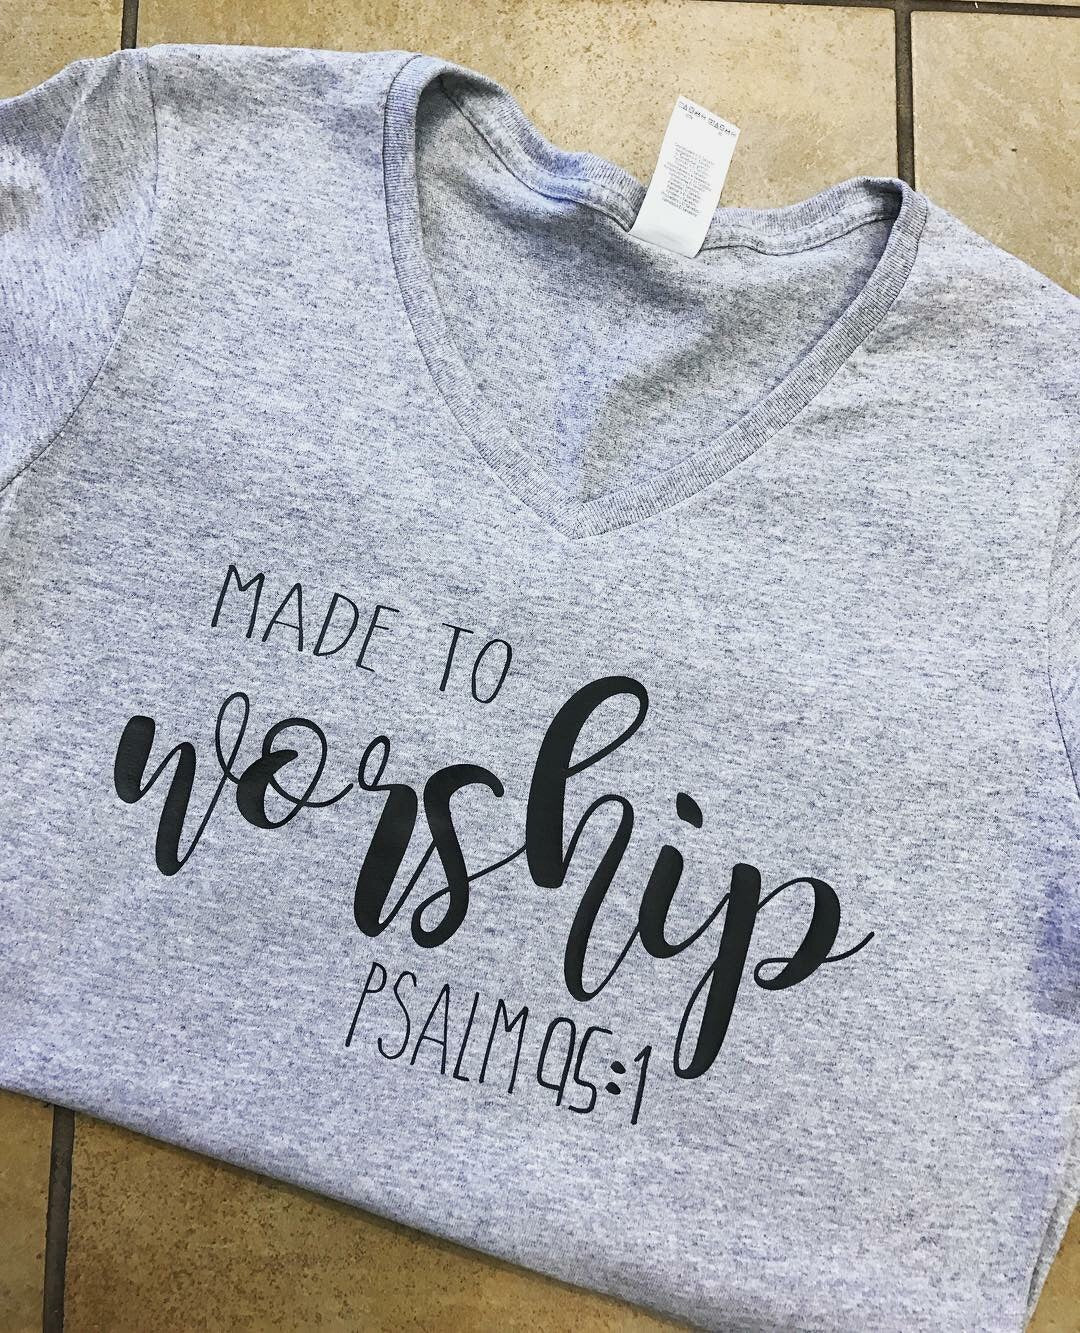 “Made To Worship” Psalm 95:1 - Sport Grey V-Neck Tee - Southern Grace Creations